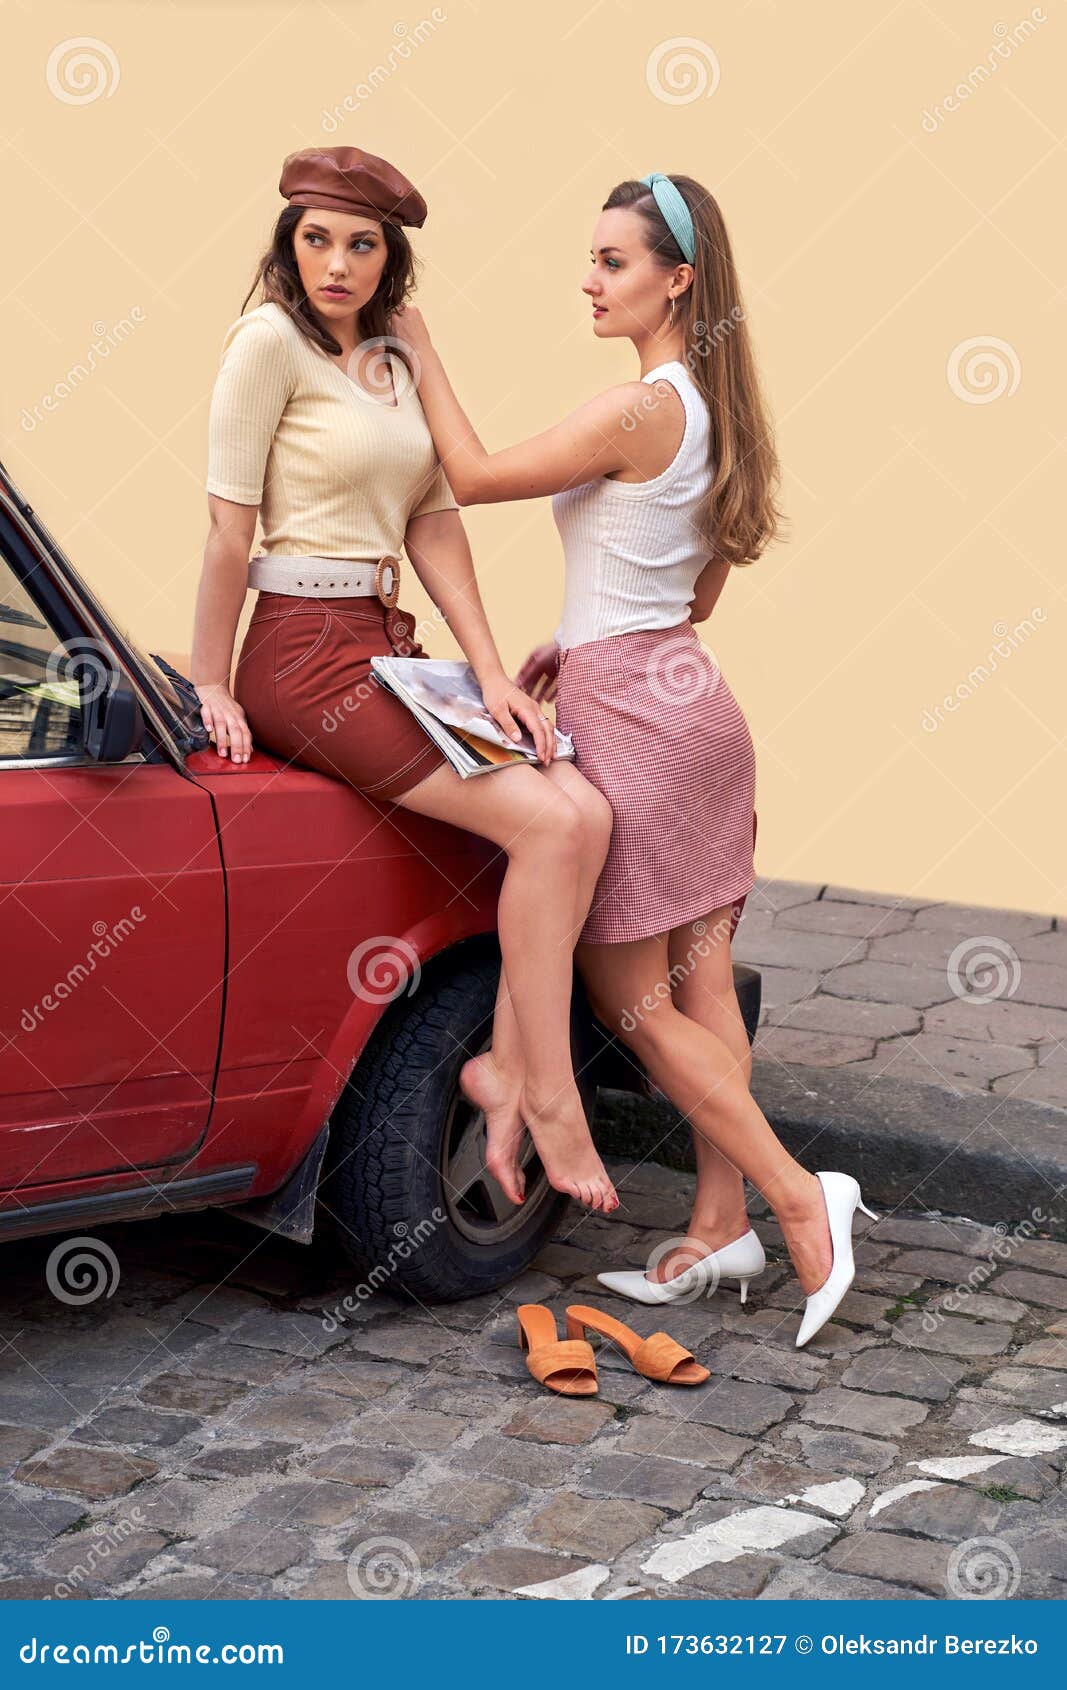 https://thumbs.dreamstime.com/z/young-beautiful-girls-dressed-retro-vintage-style-enjoying-old-european-city-lifestyle-young-beautiful-girls-dressed-173632127.jpg